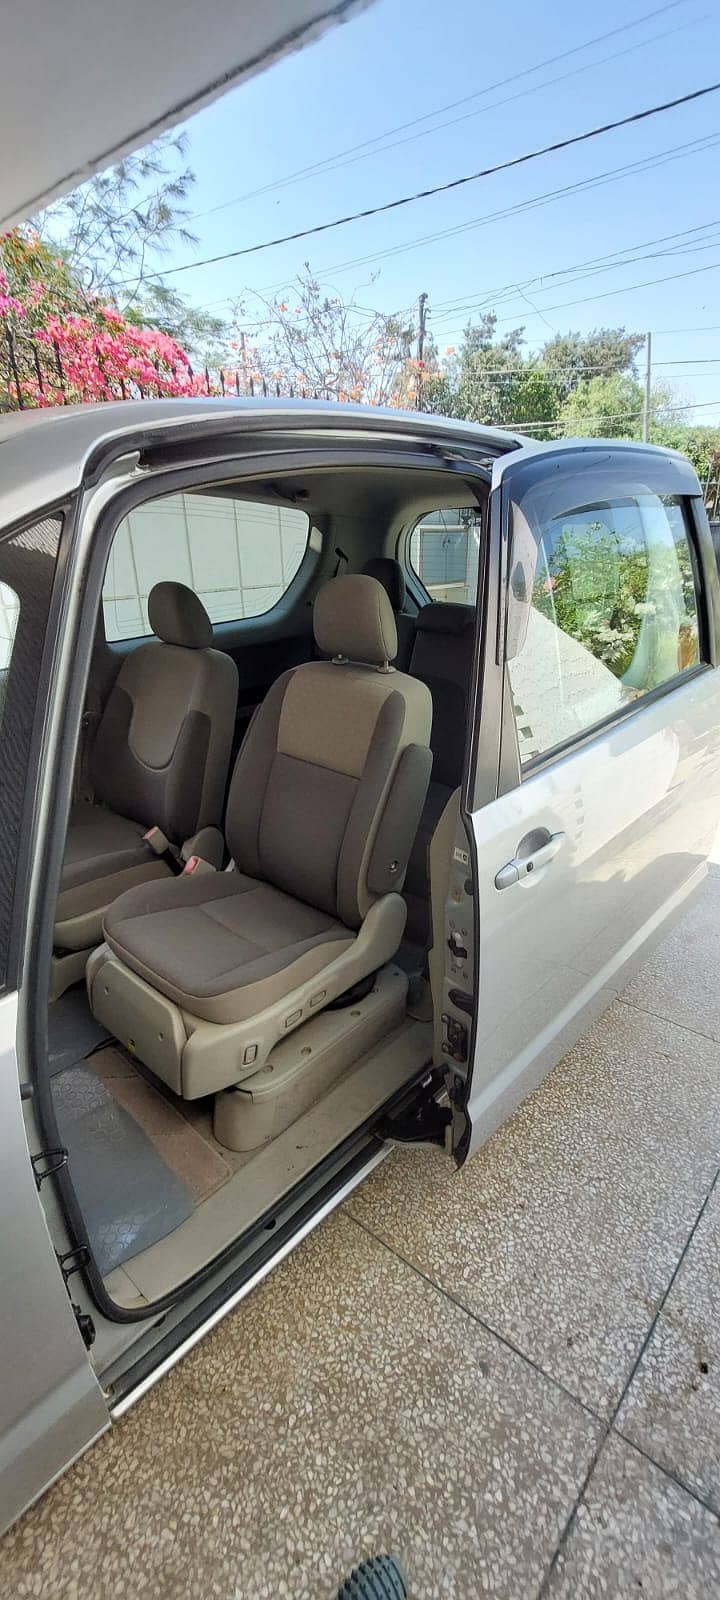 Toyota Porte 2011 with special seat for Disabled/Handicap persons 7